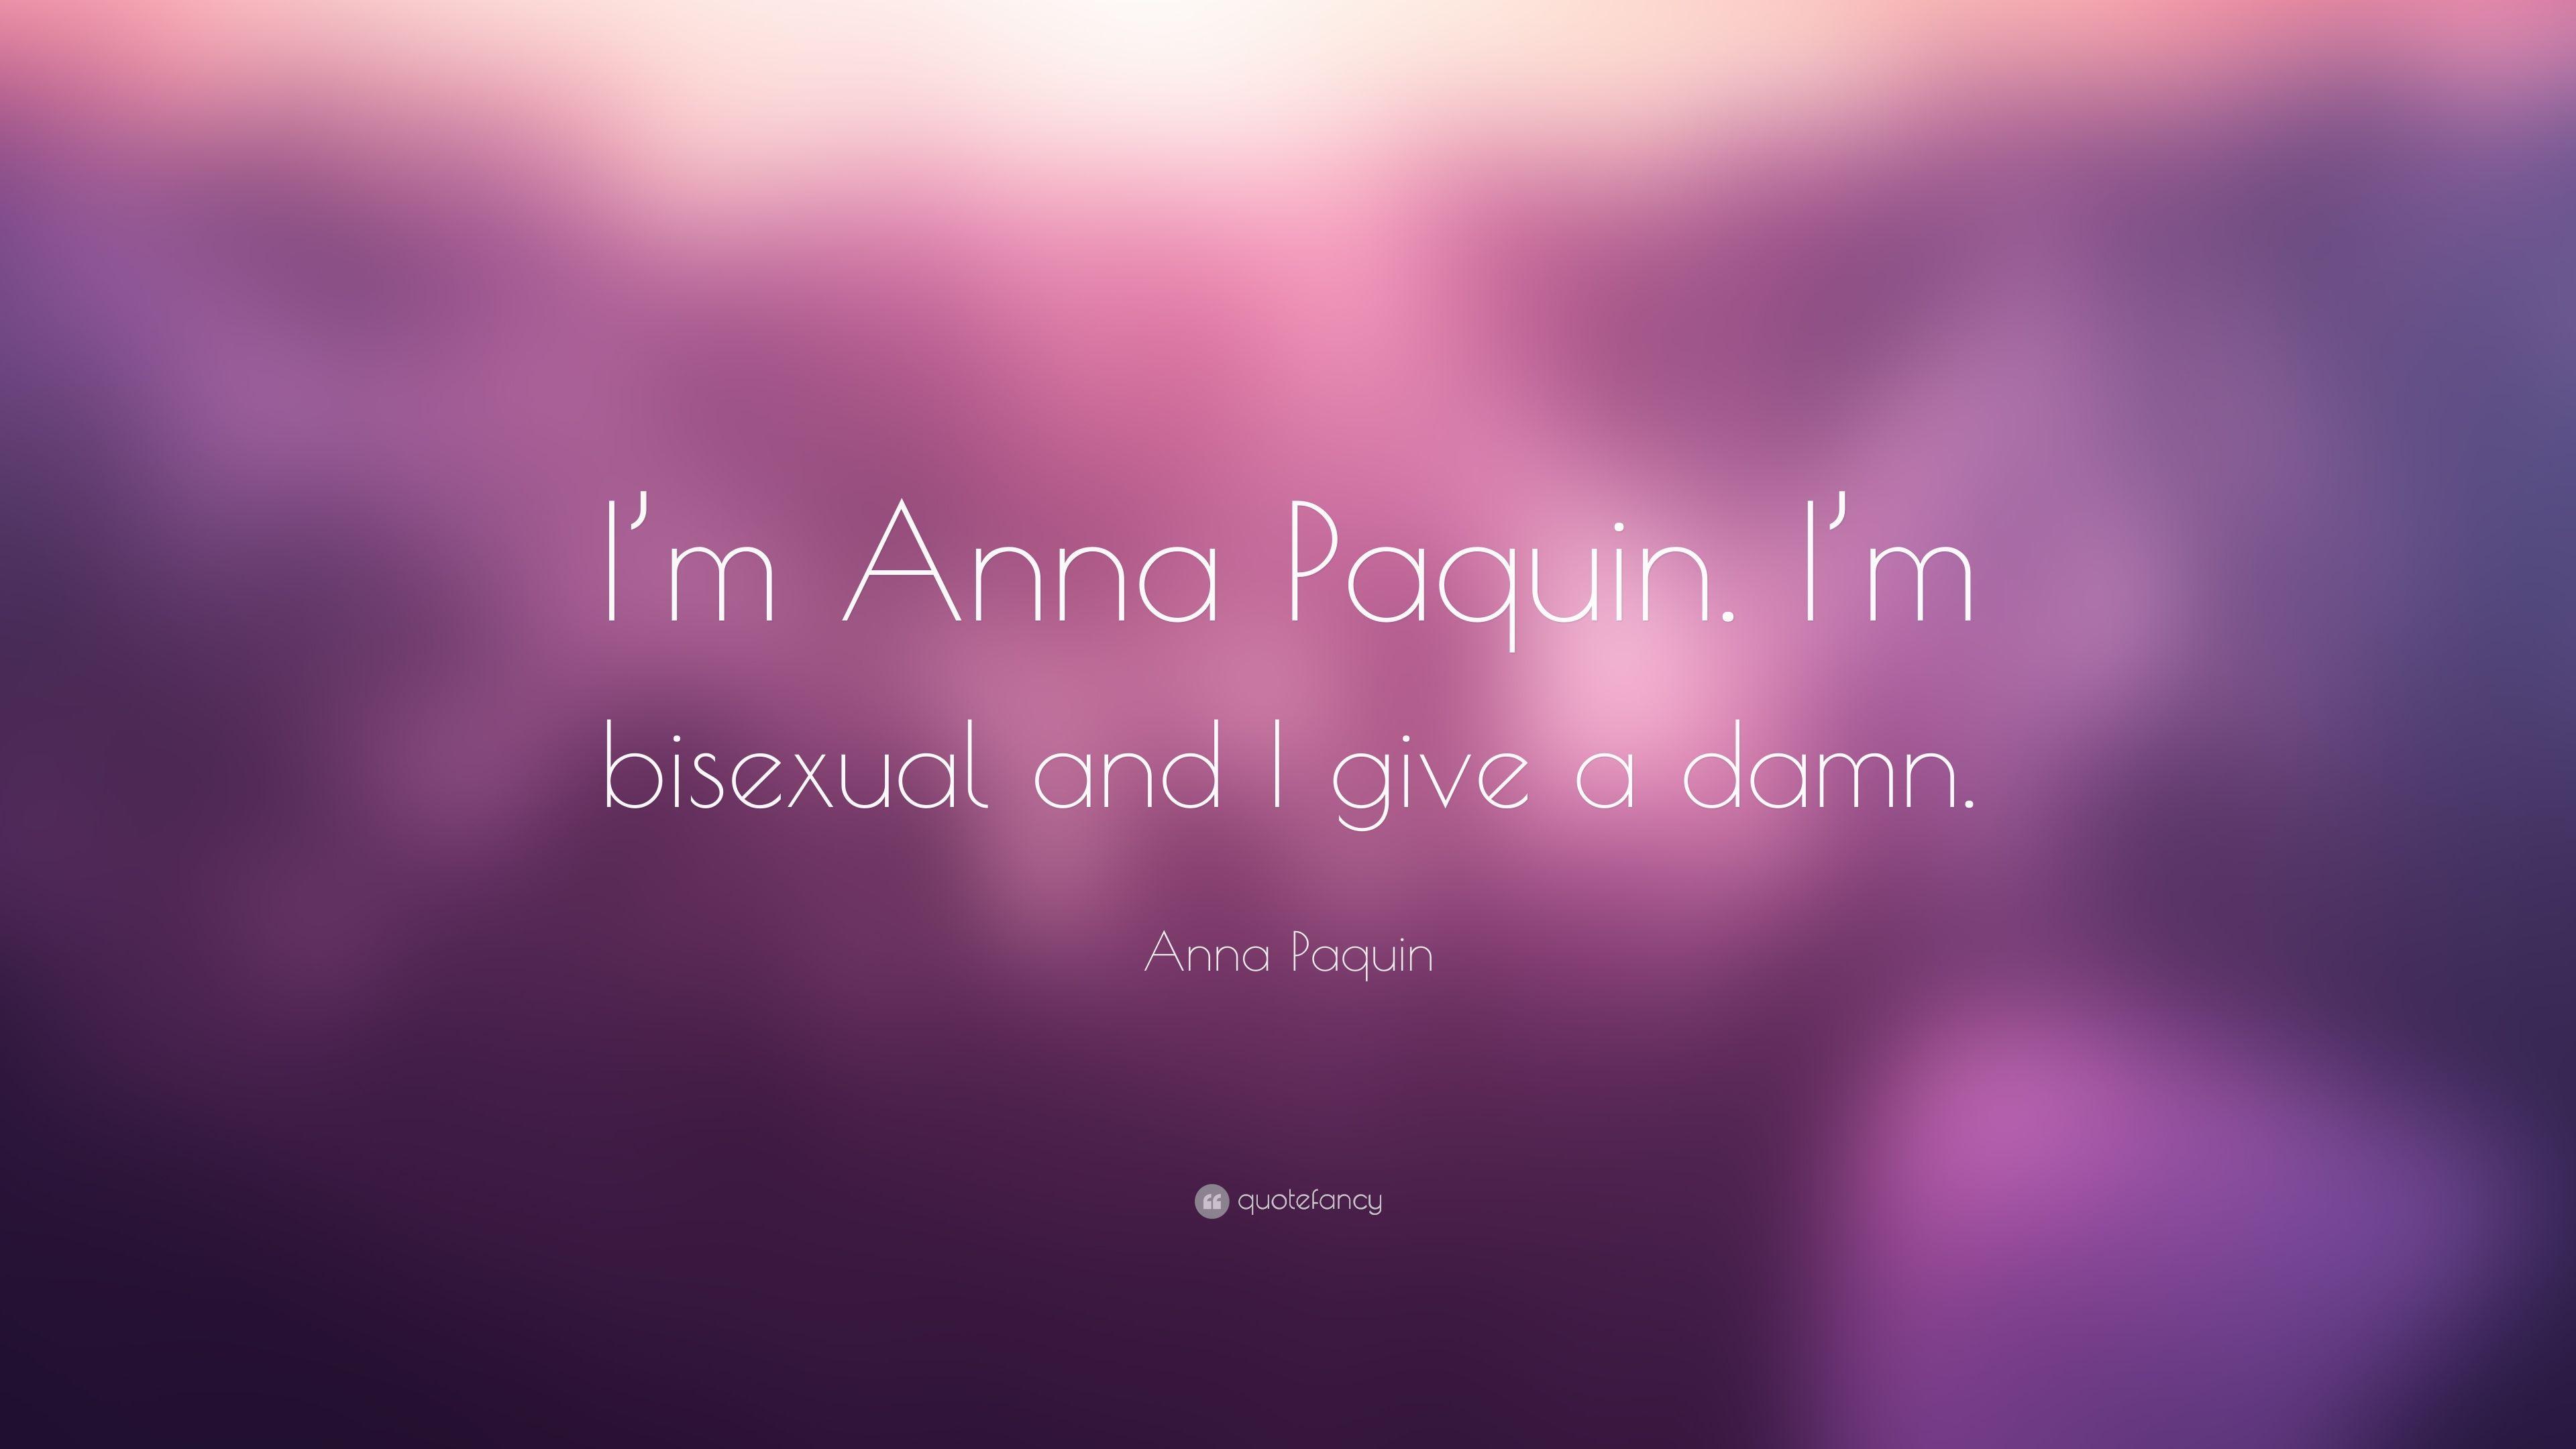 Anna Paquin Quote: “I'm Anna Paquin. I'm bisexual and I give a